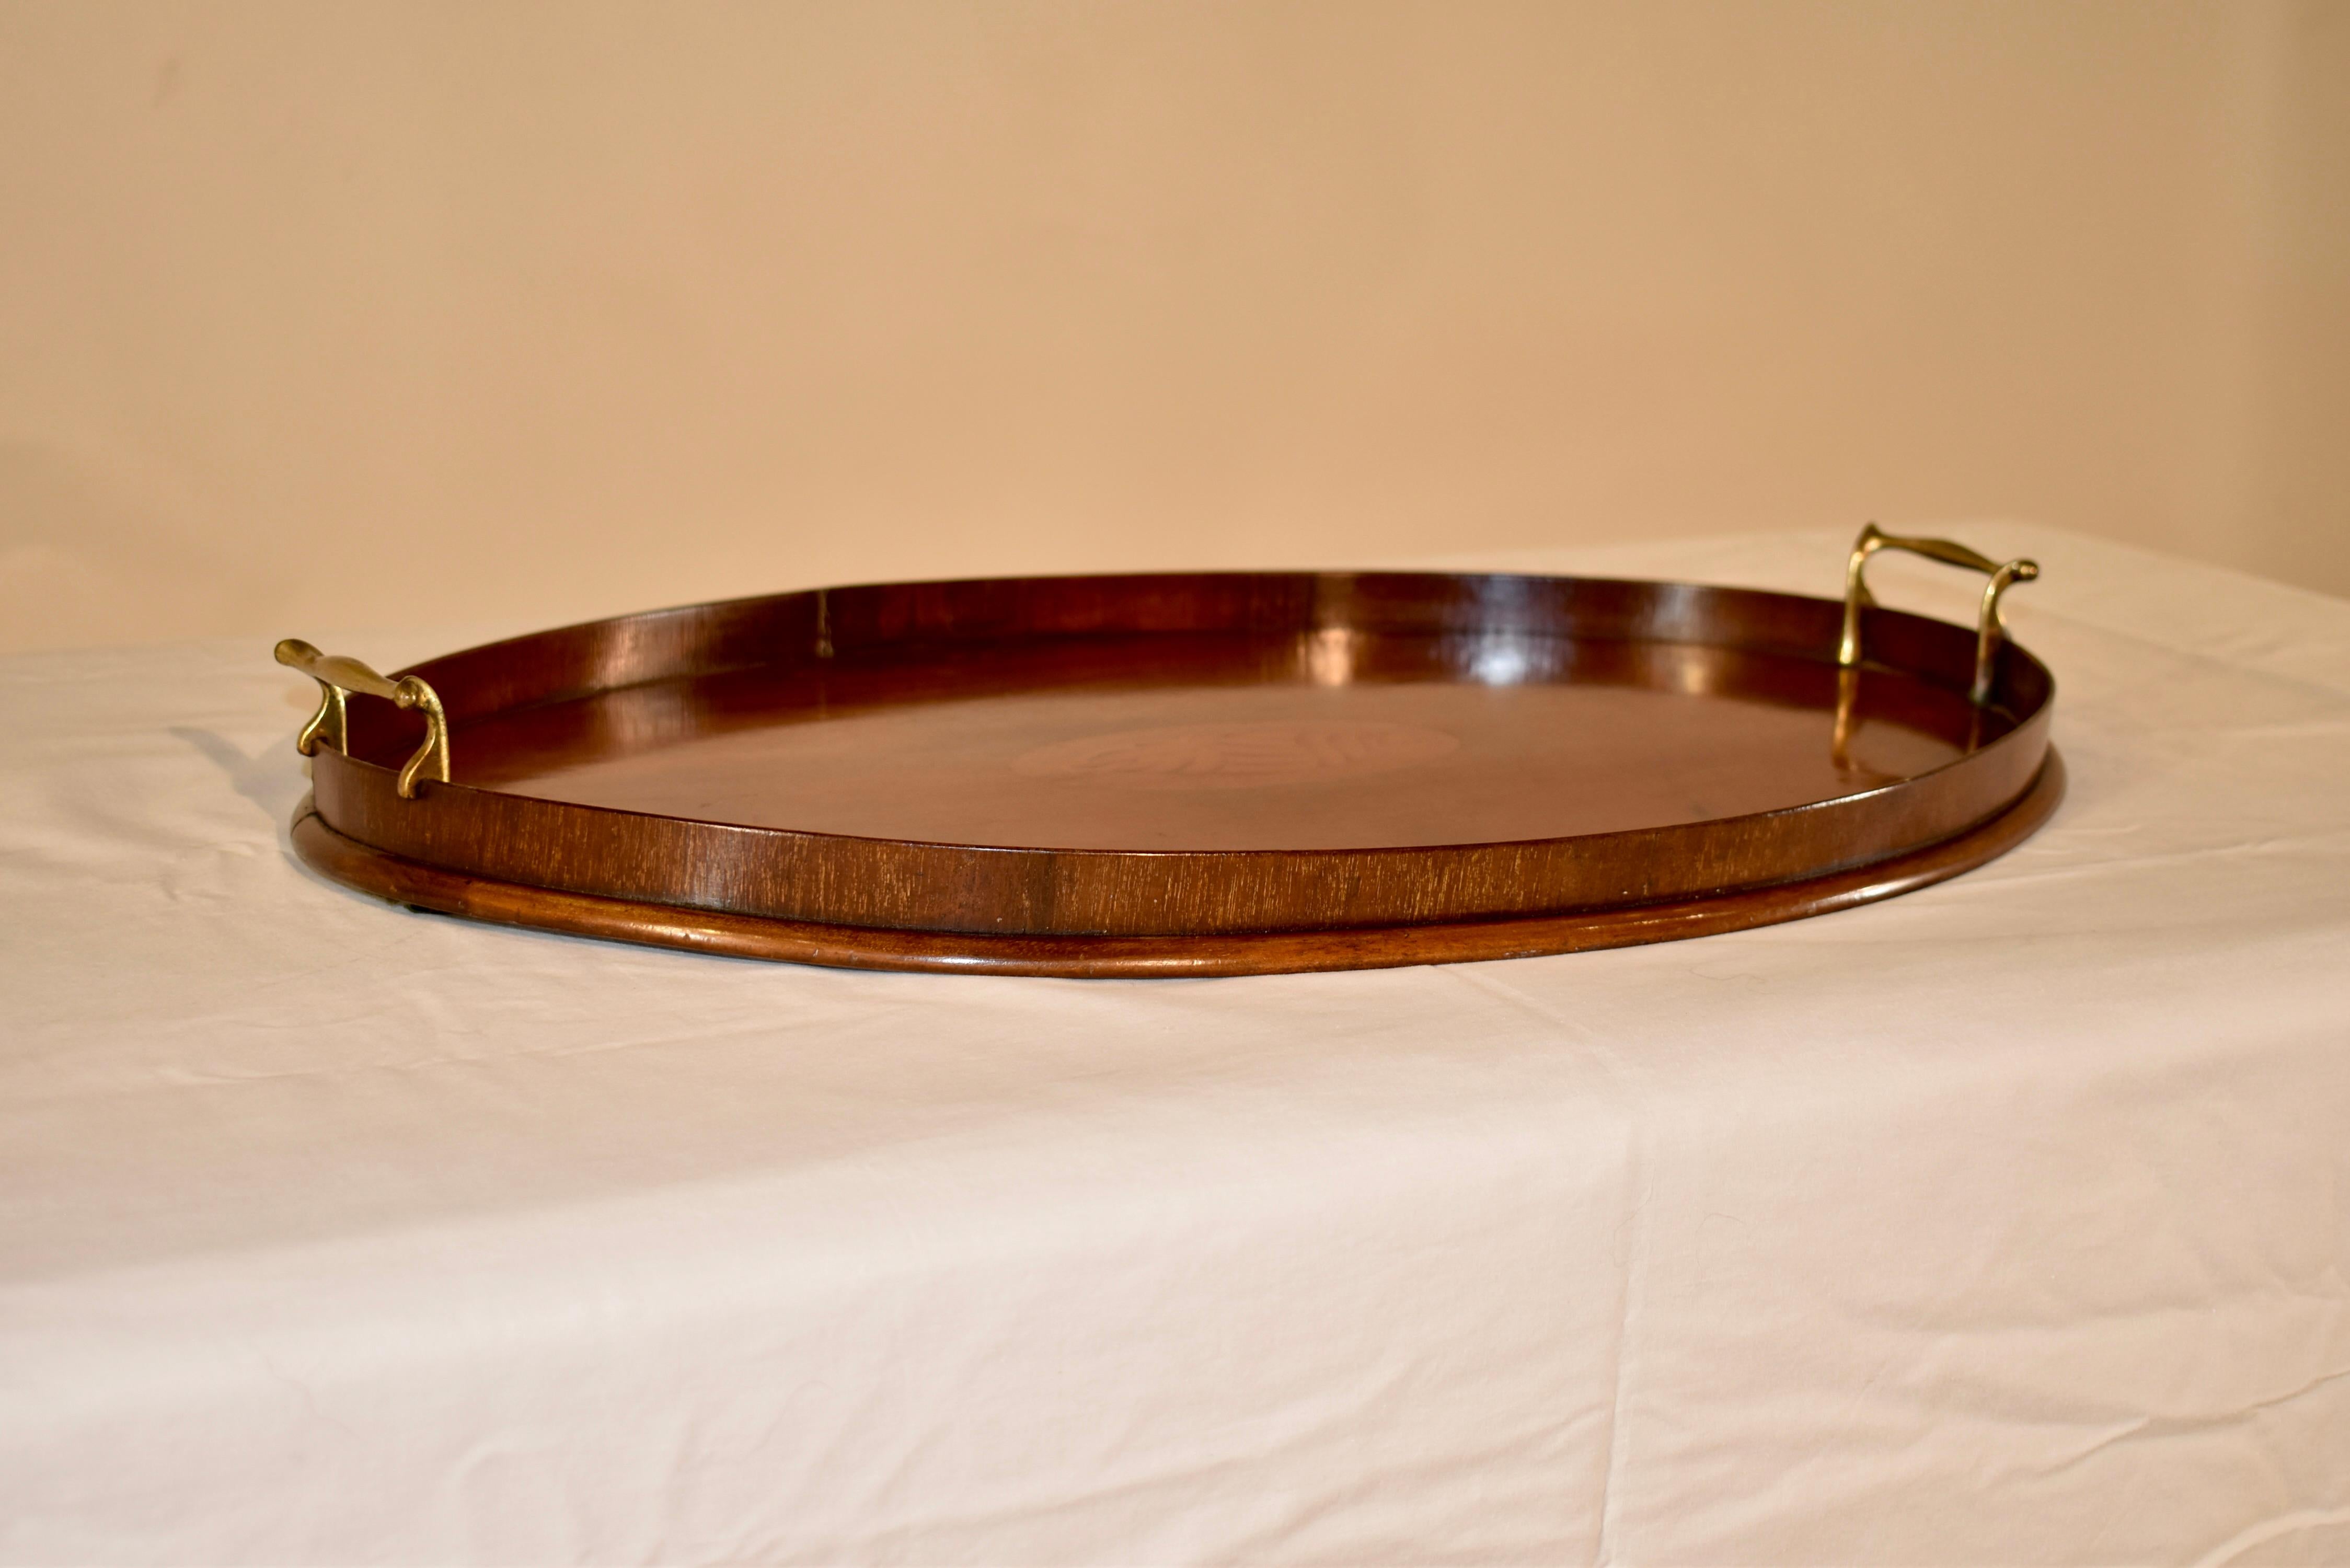 Early 19th century mahogany tray from England with a gallery surrounding the tray, which has a central lozenge with an inlaid shell made from satinwood and boxwood. Lovely graining and color.